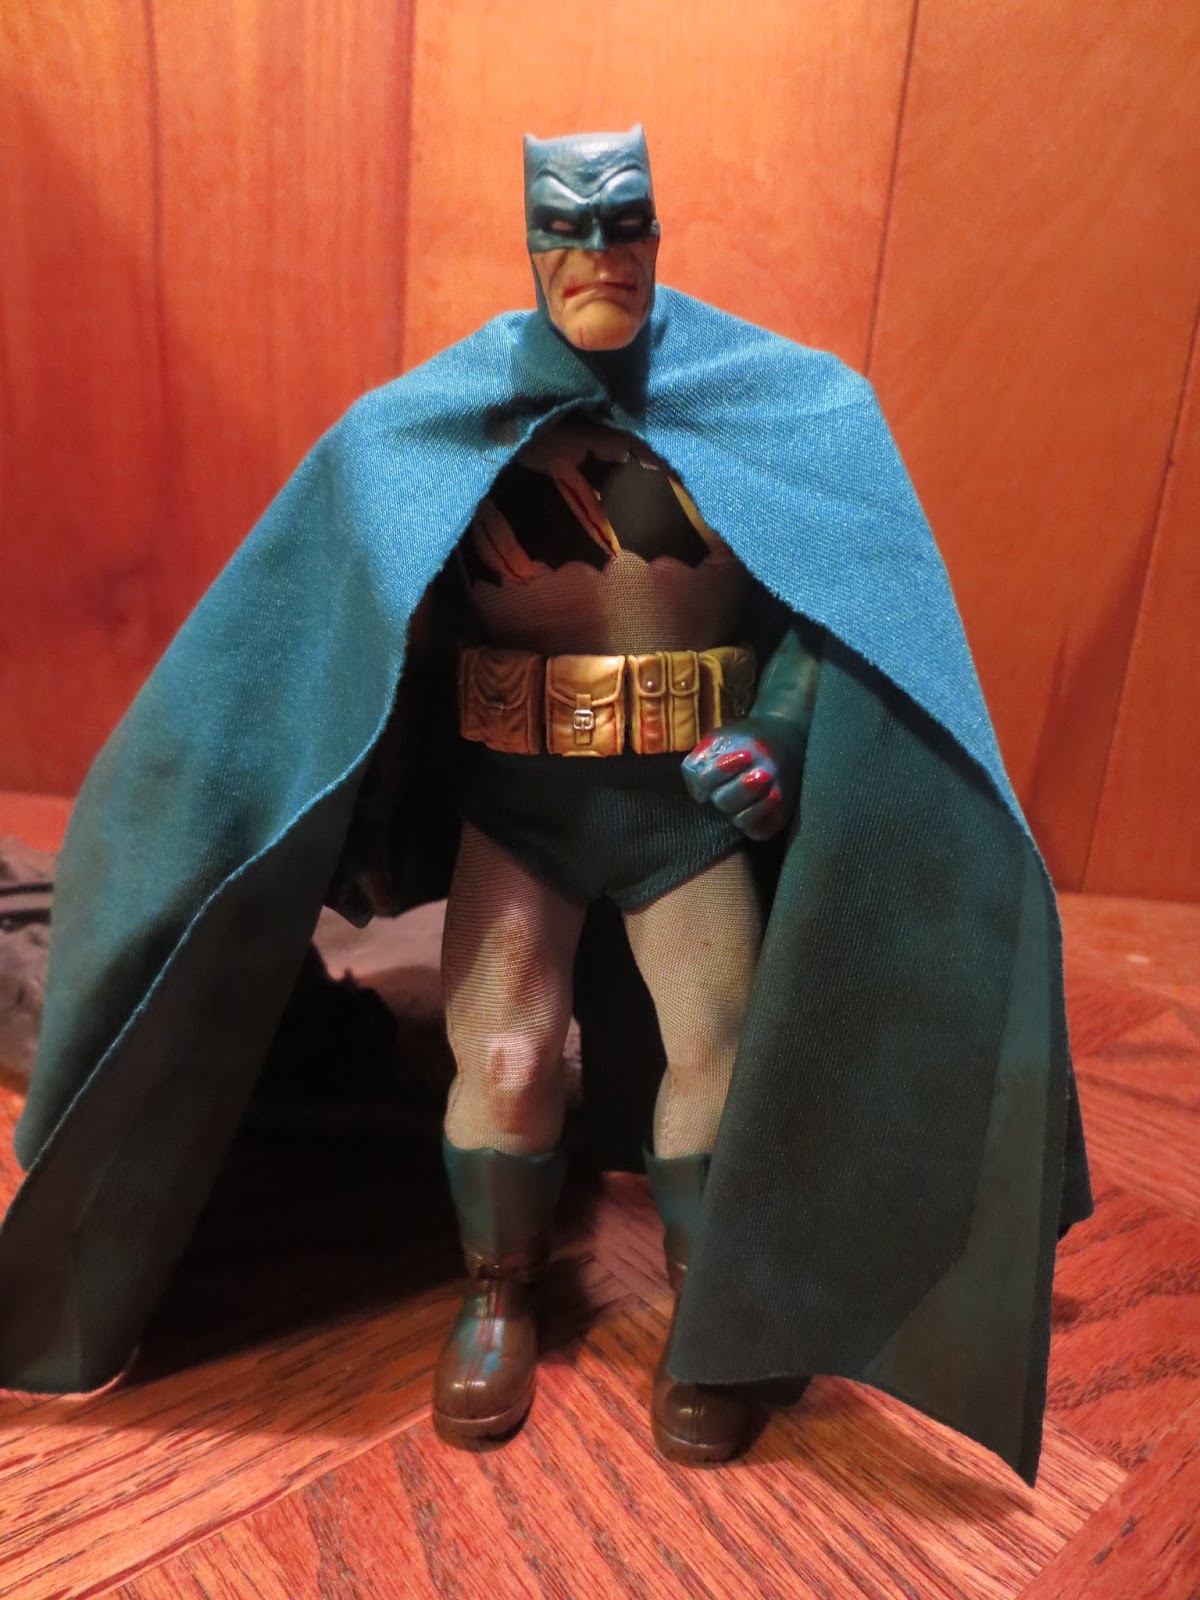 Action Figure Barbecue: Action Figure Review: Batman and Mutant Leader from  One:12 Collective DC Universe by Mattel